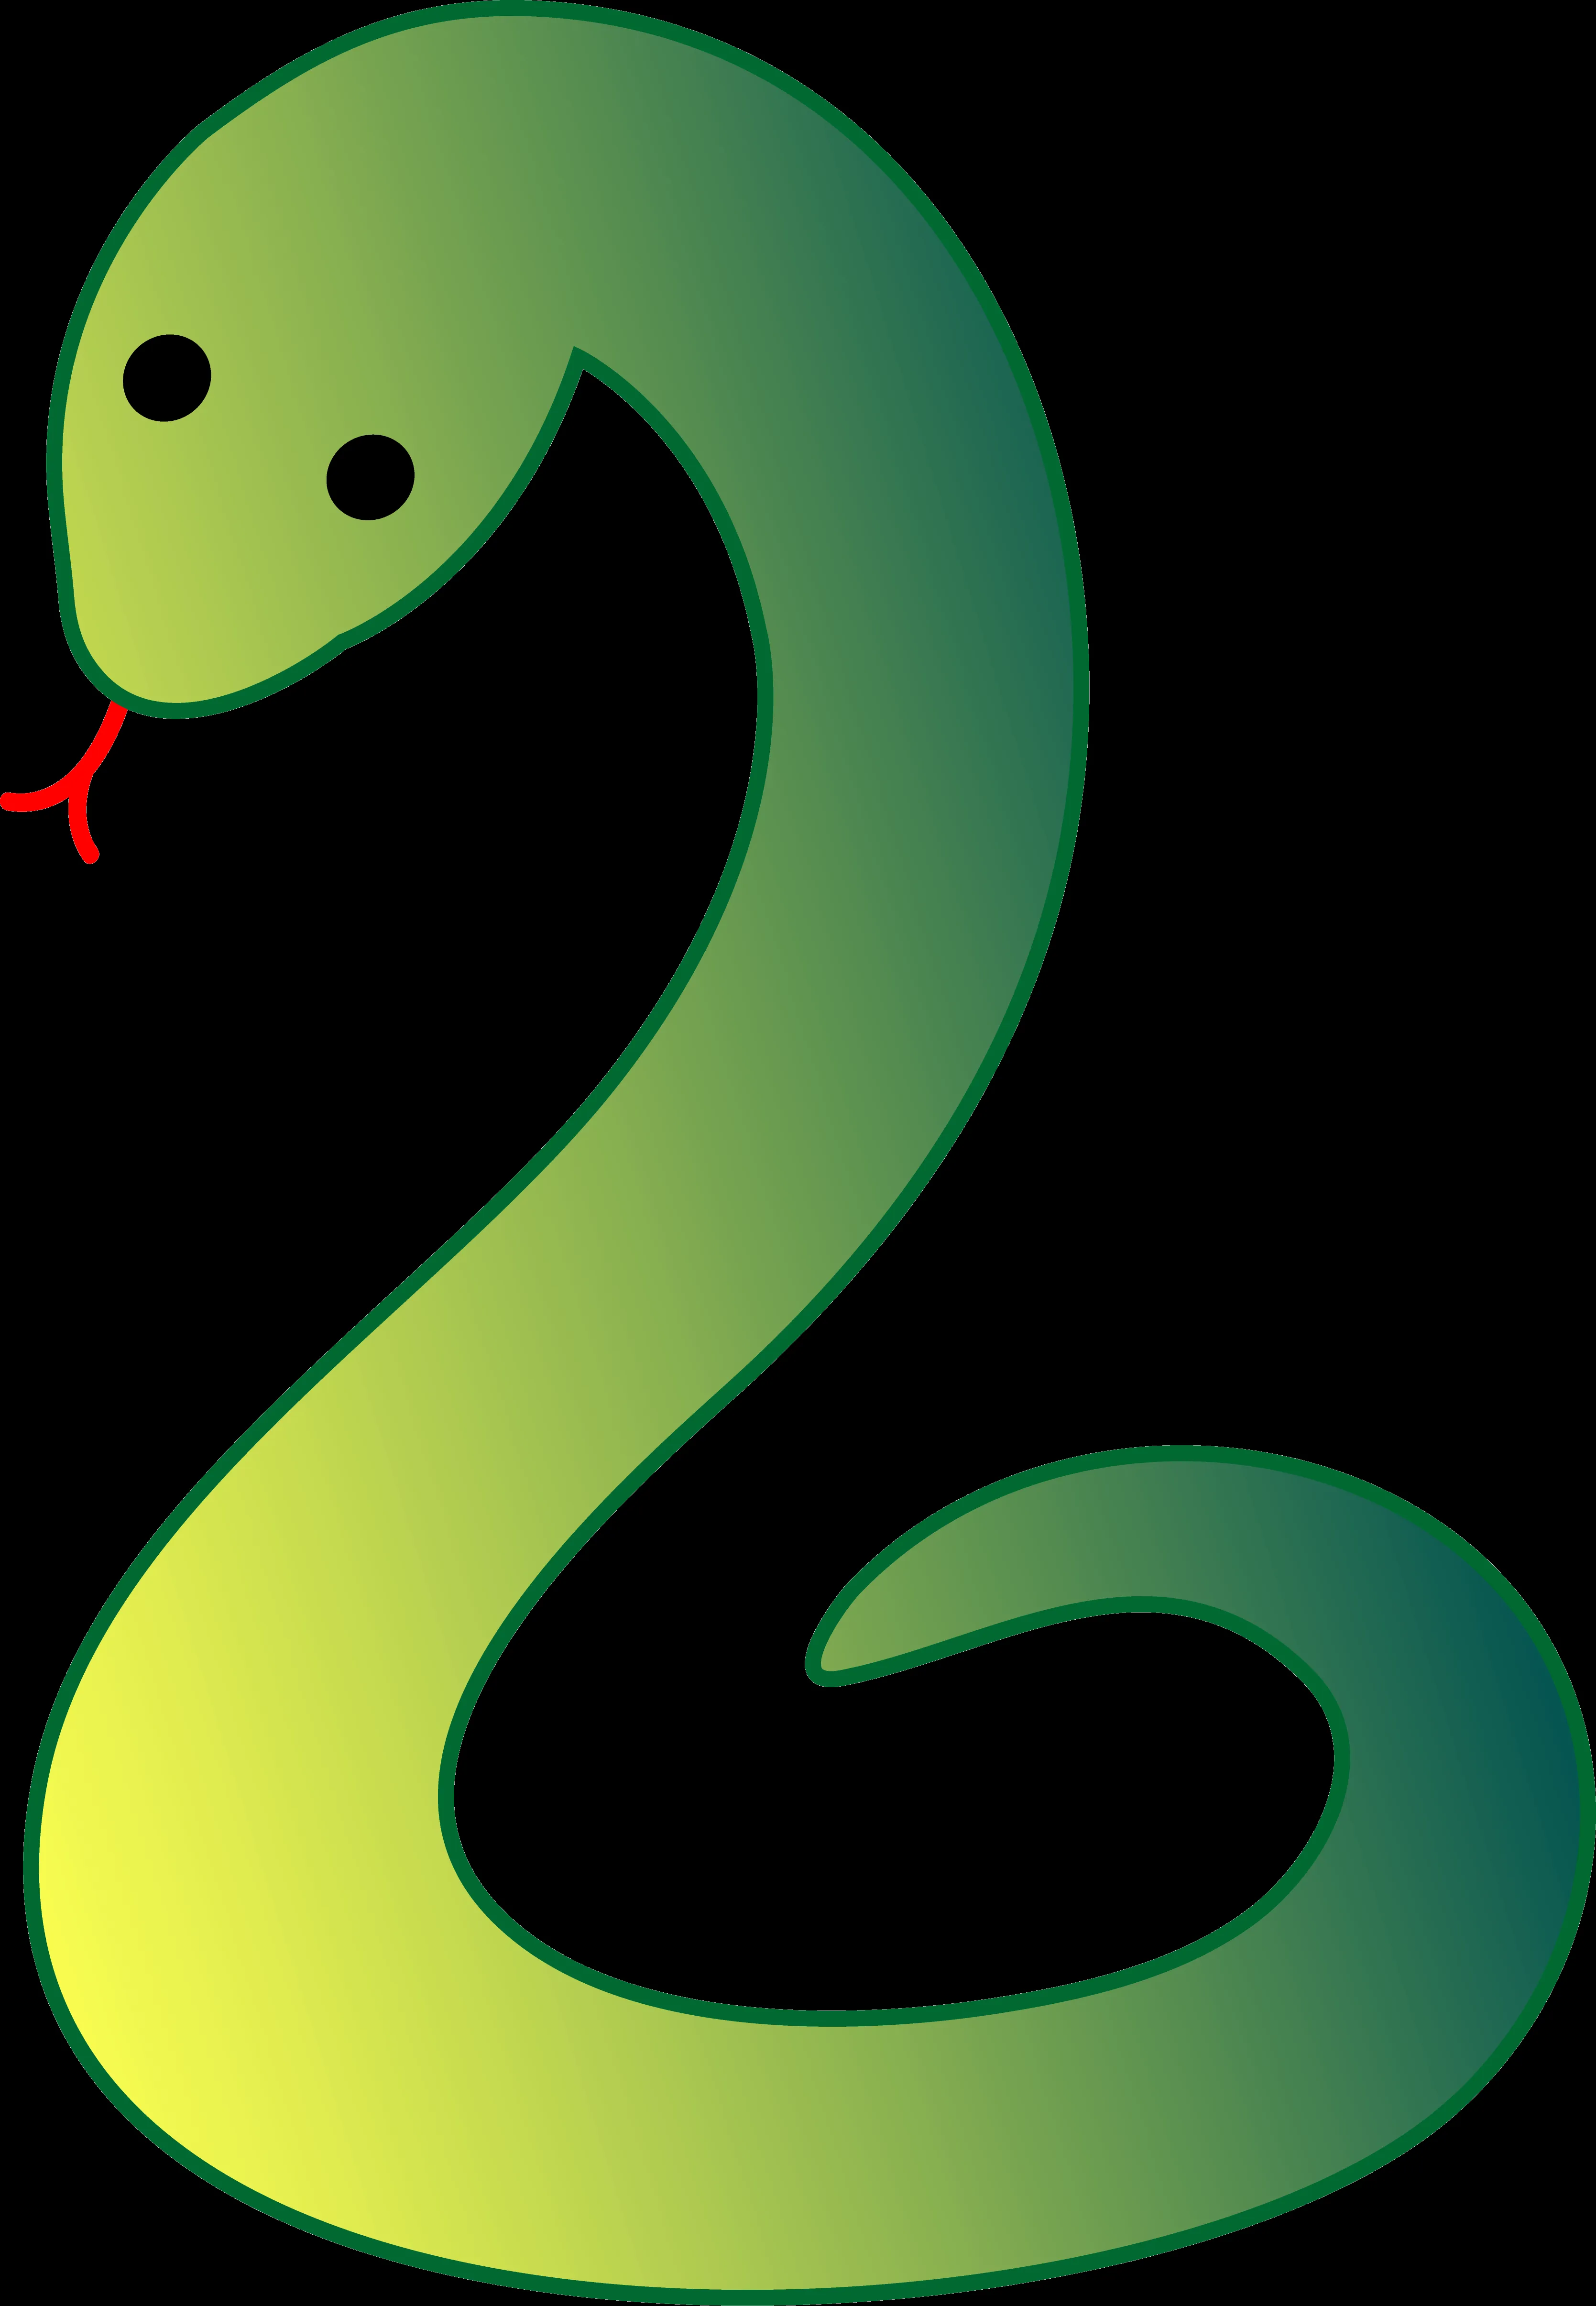 Snake Clipart Black And White | Clipart Panda - Free Clipart Images